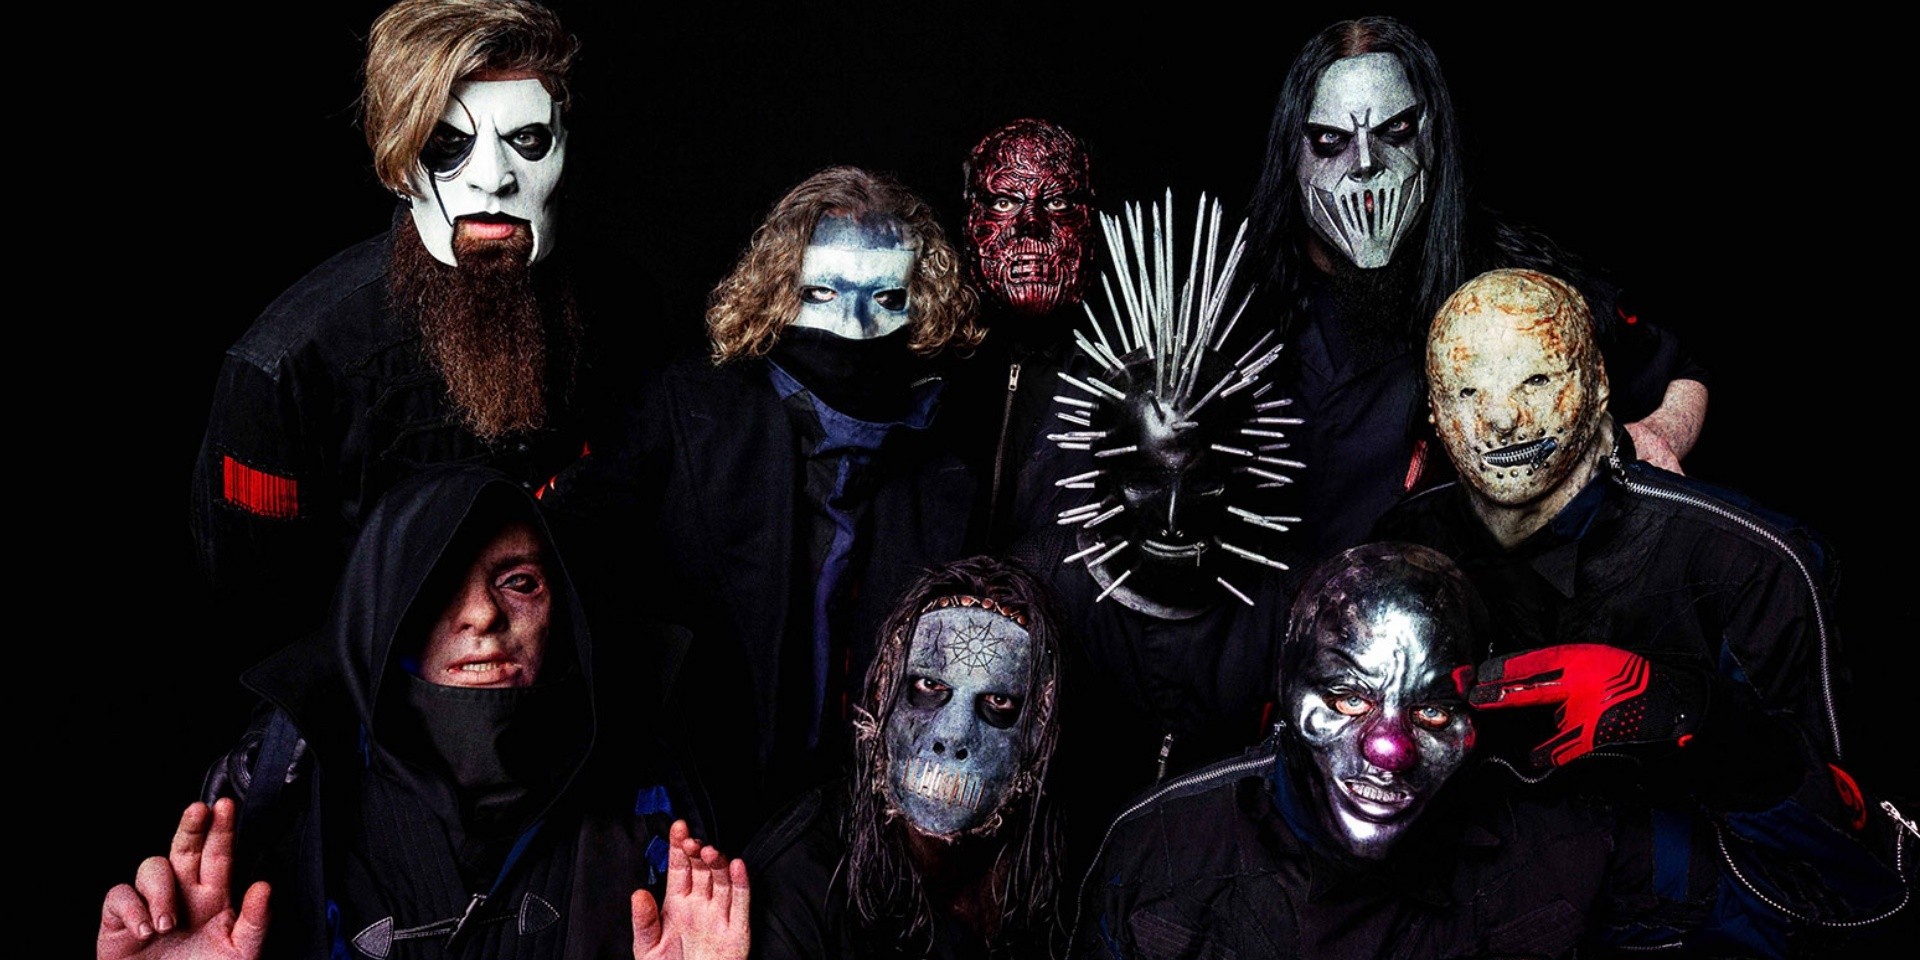 Slipknot details forthcoming album, shares new single and music video, 'Unsainted' – watch